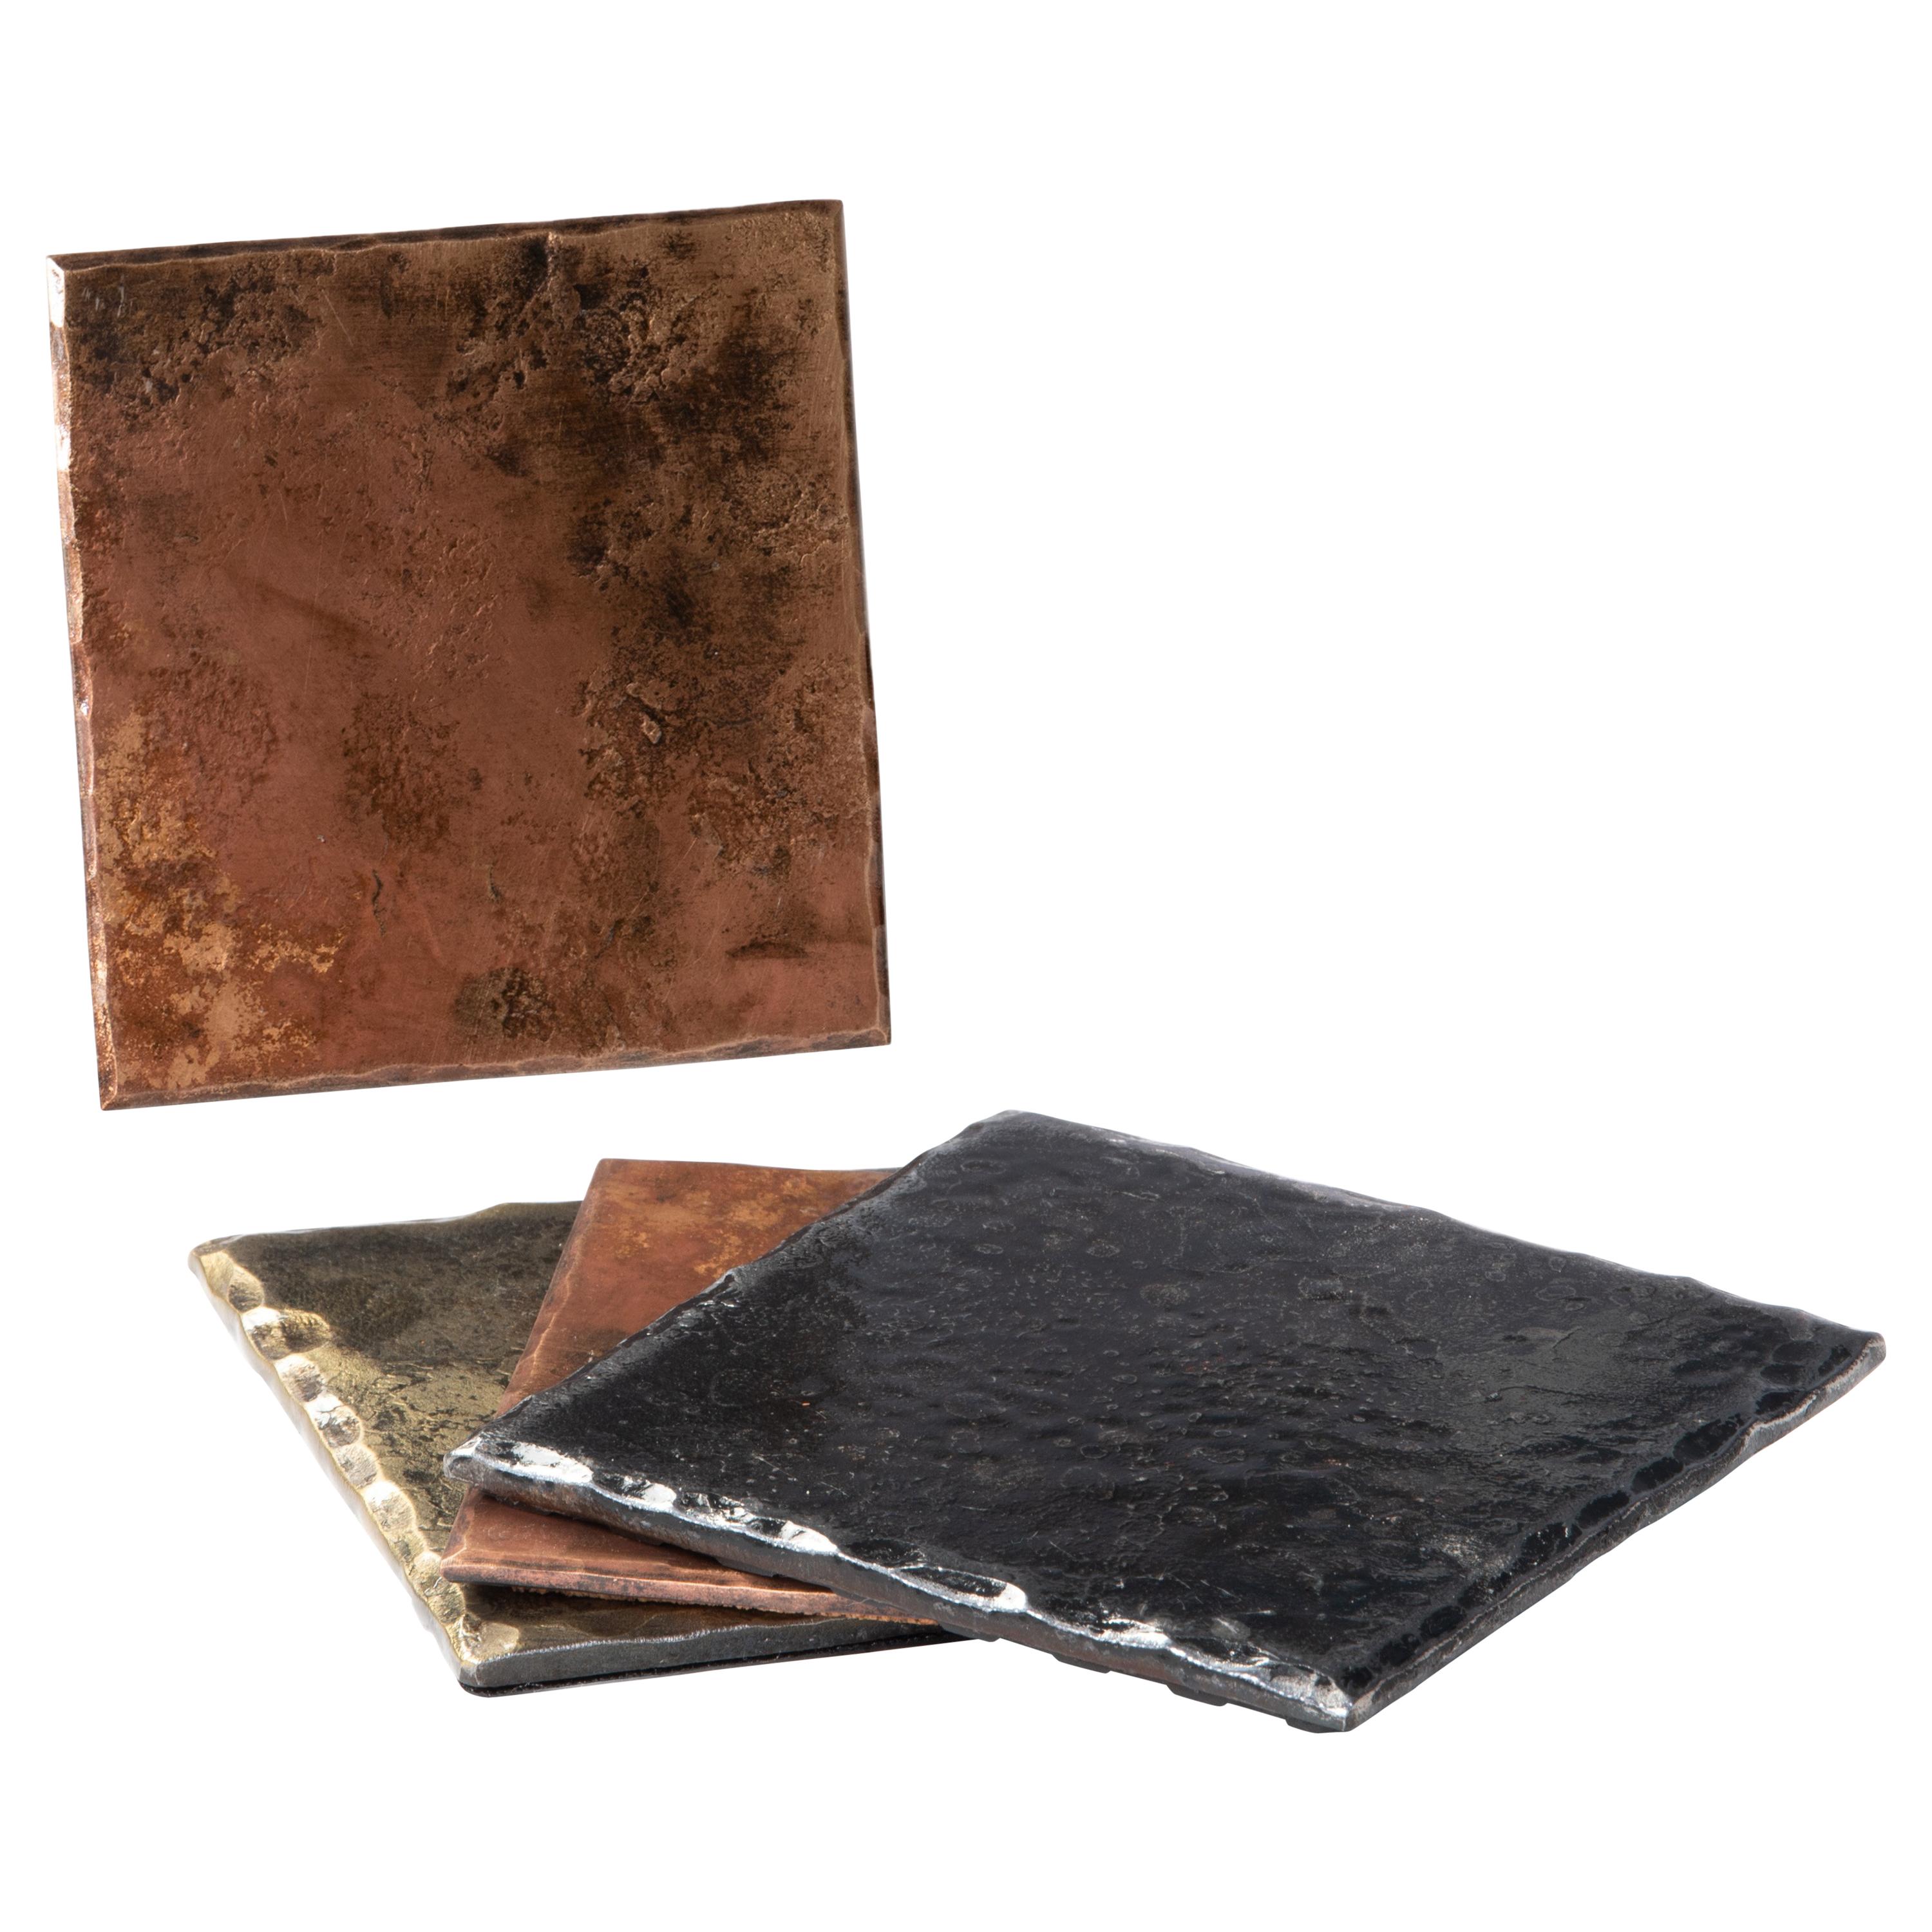 A handcrafted, square coaster made from bronze that has been forge textured over a rough steel anvil face to provide texture. The edges are hammered and beveled. The bronze is burnished to accentuate the rustic, forged details. The oxidized, brushed